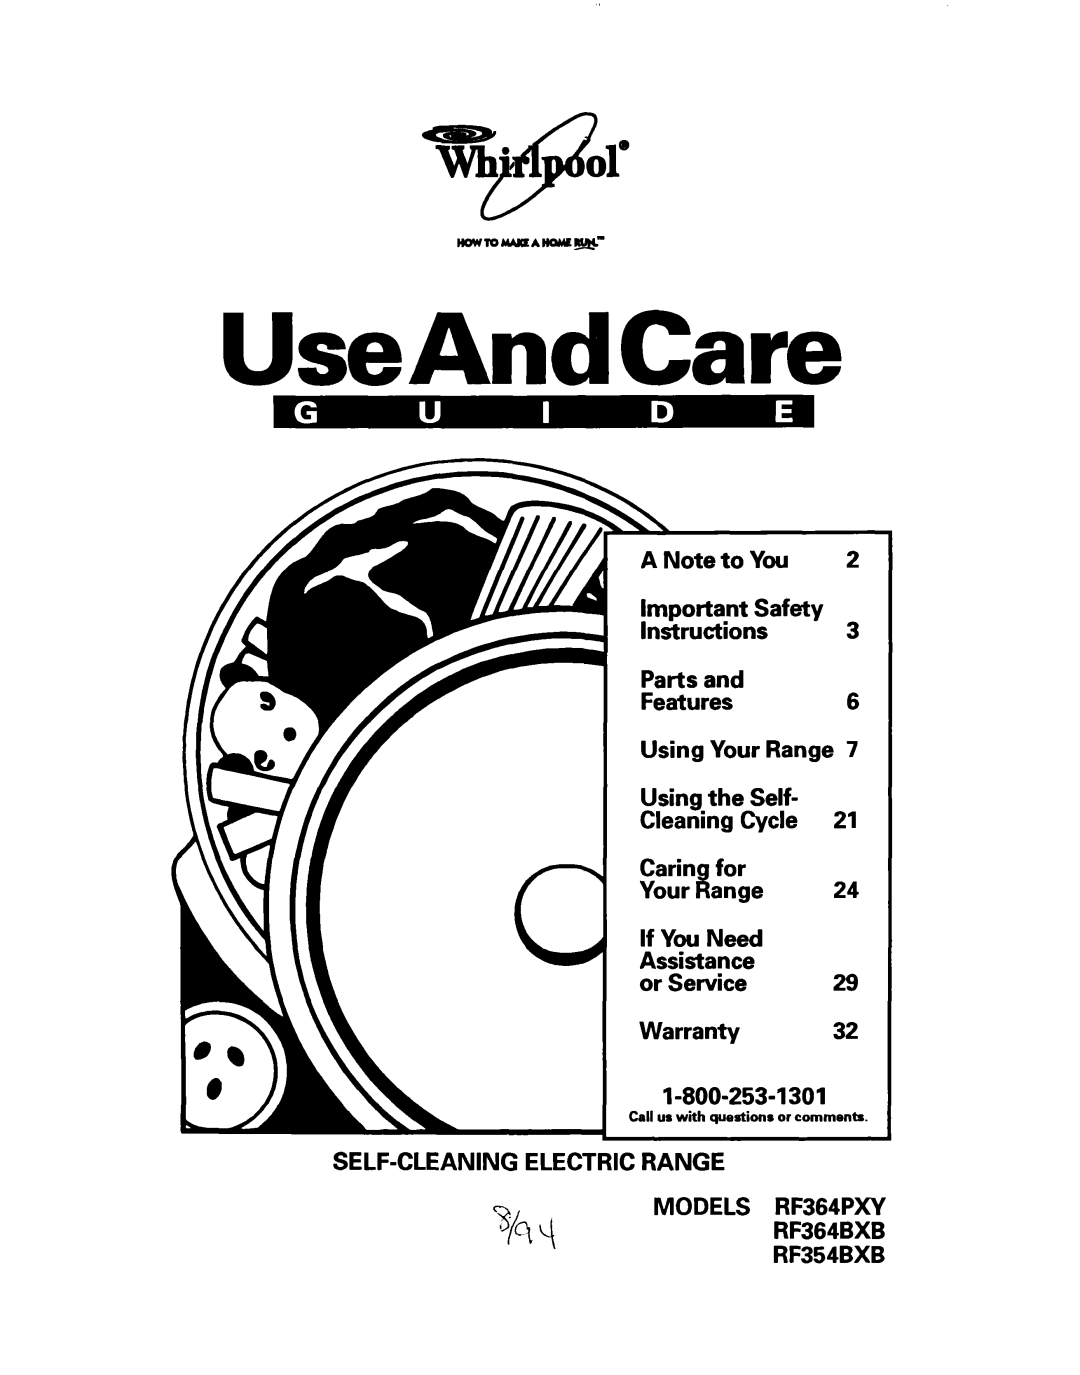 Whirlpool RF364BXB, RF364PXY important safety instructions UseAndCare, A Note to You Important Safety Instructions 